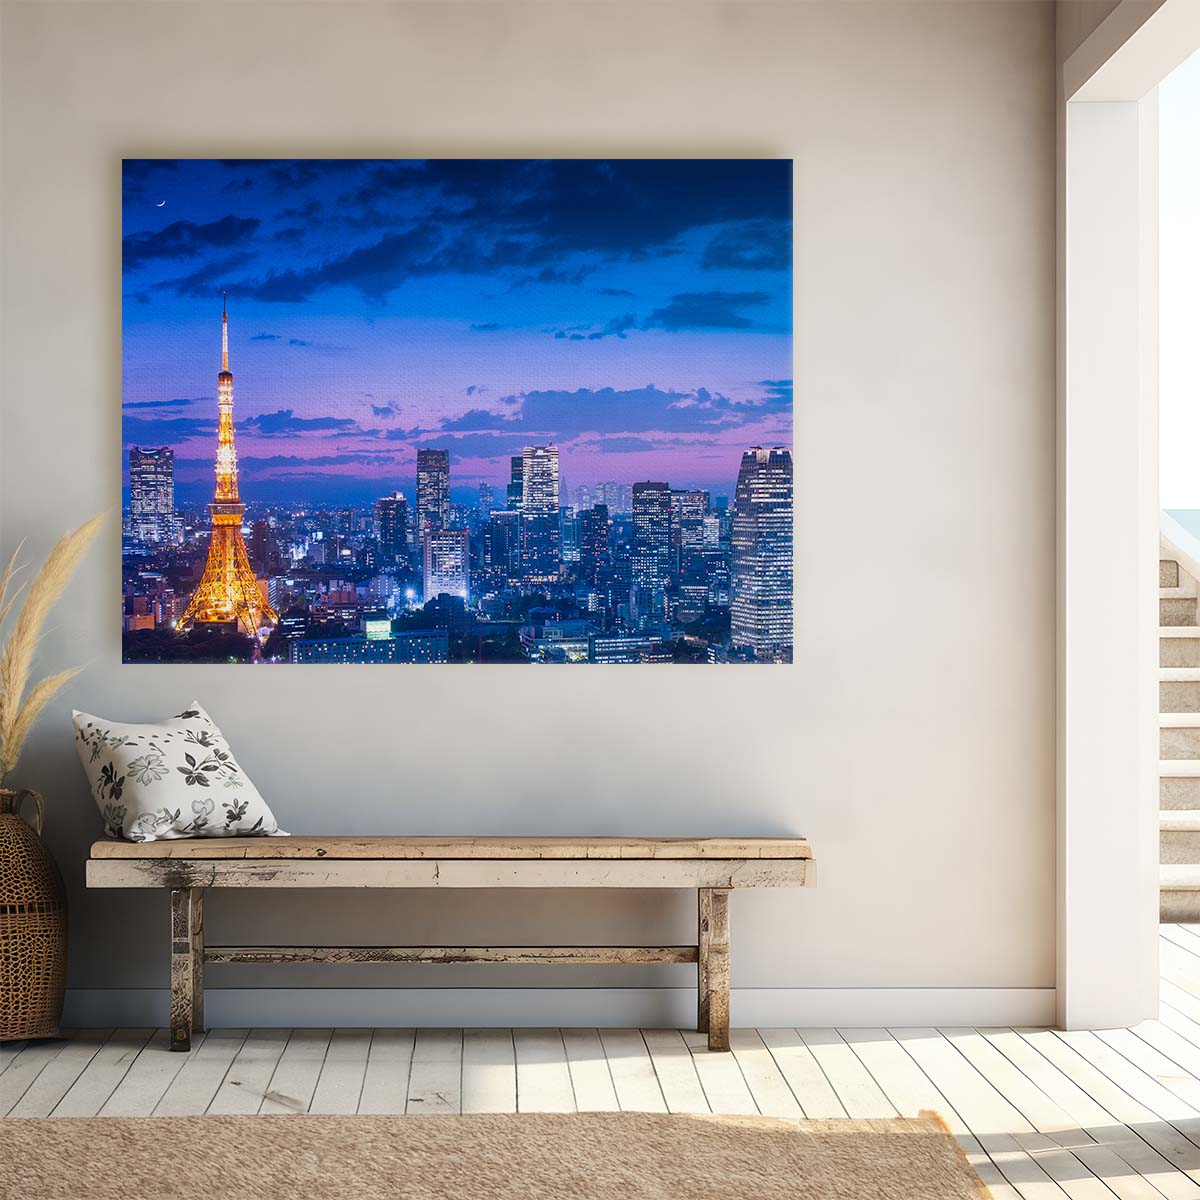 Tokyo Tower Golden Twilight Cityscape Wall Art by Luxuriance Designs. Made in USA.